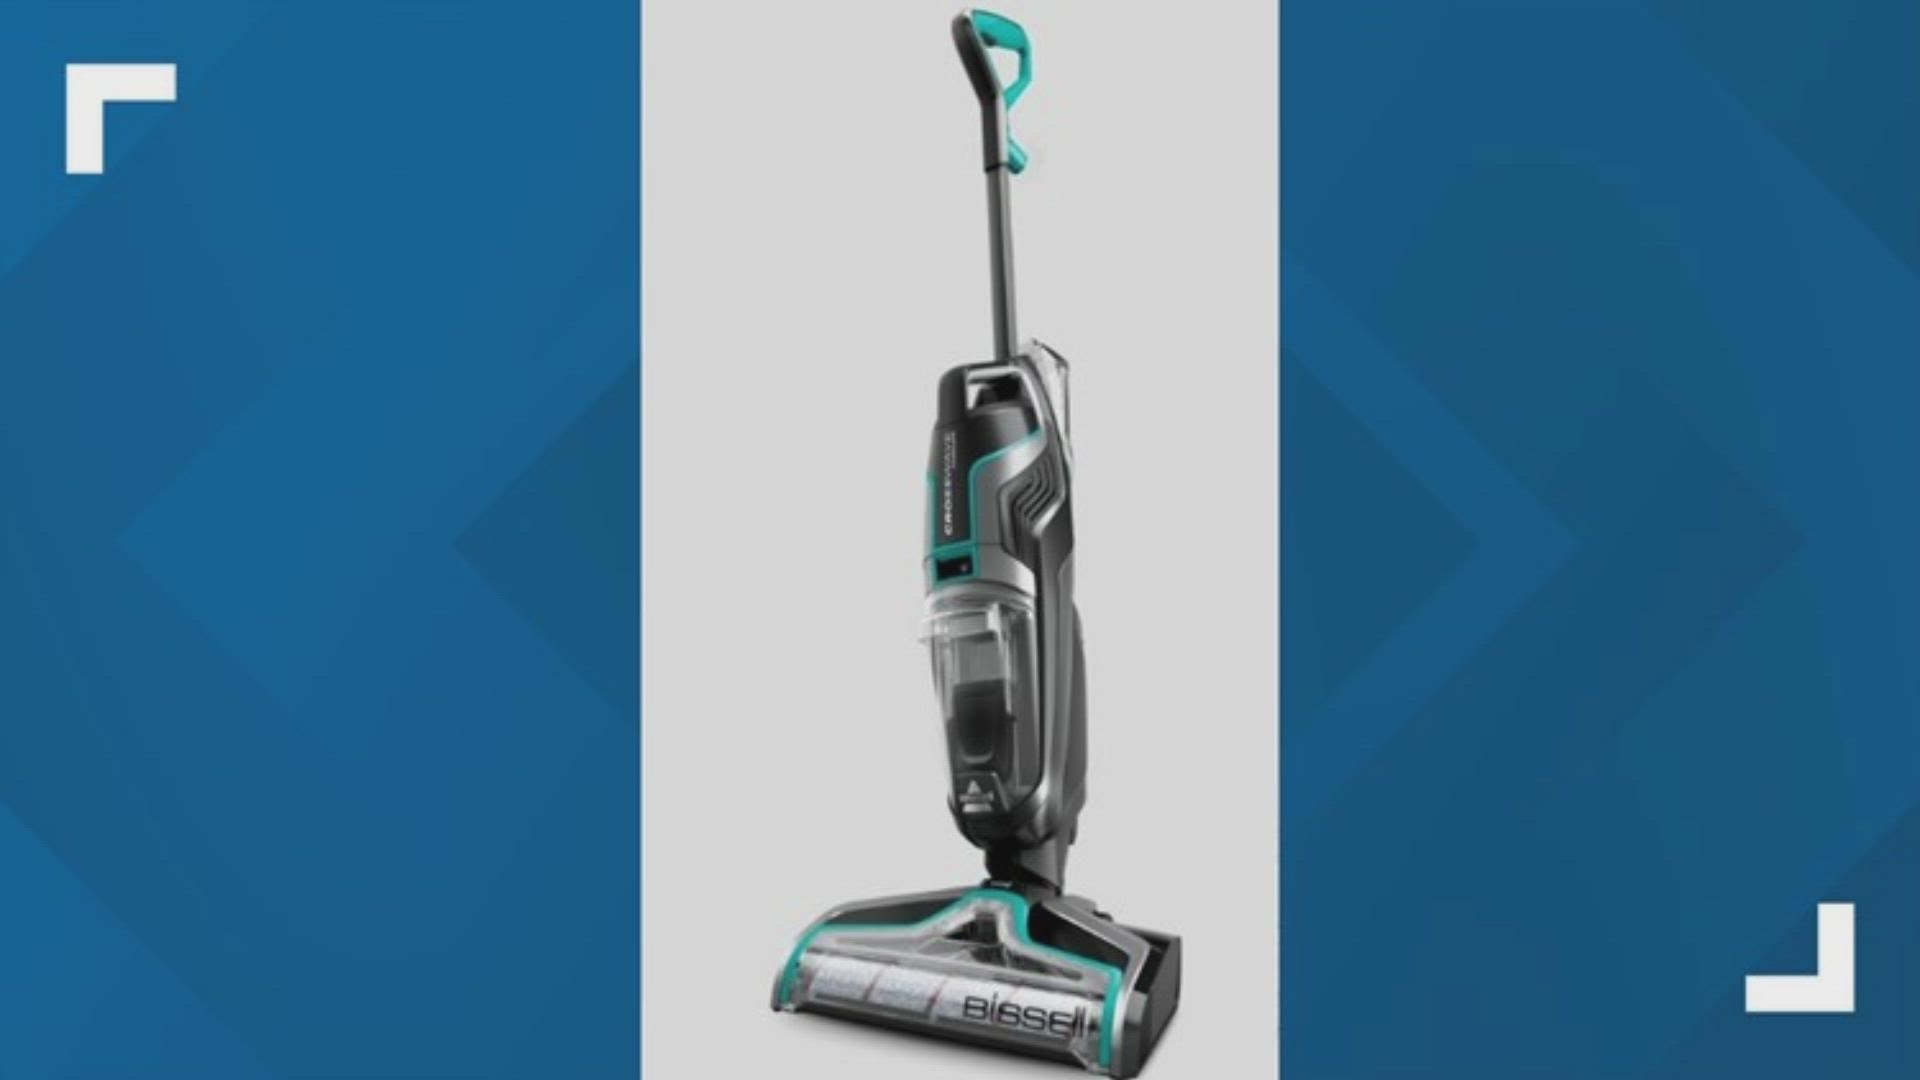 The models being recalled are 2551, 2551W and 25519. About 65,000 of the vacuums were sold.